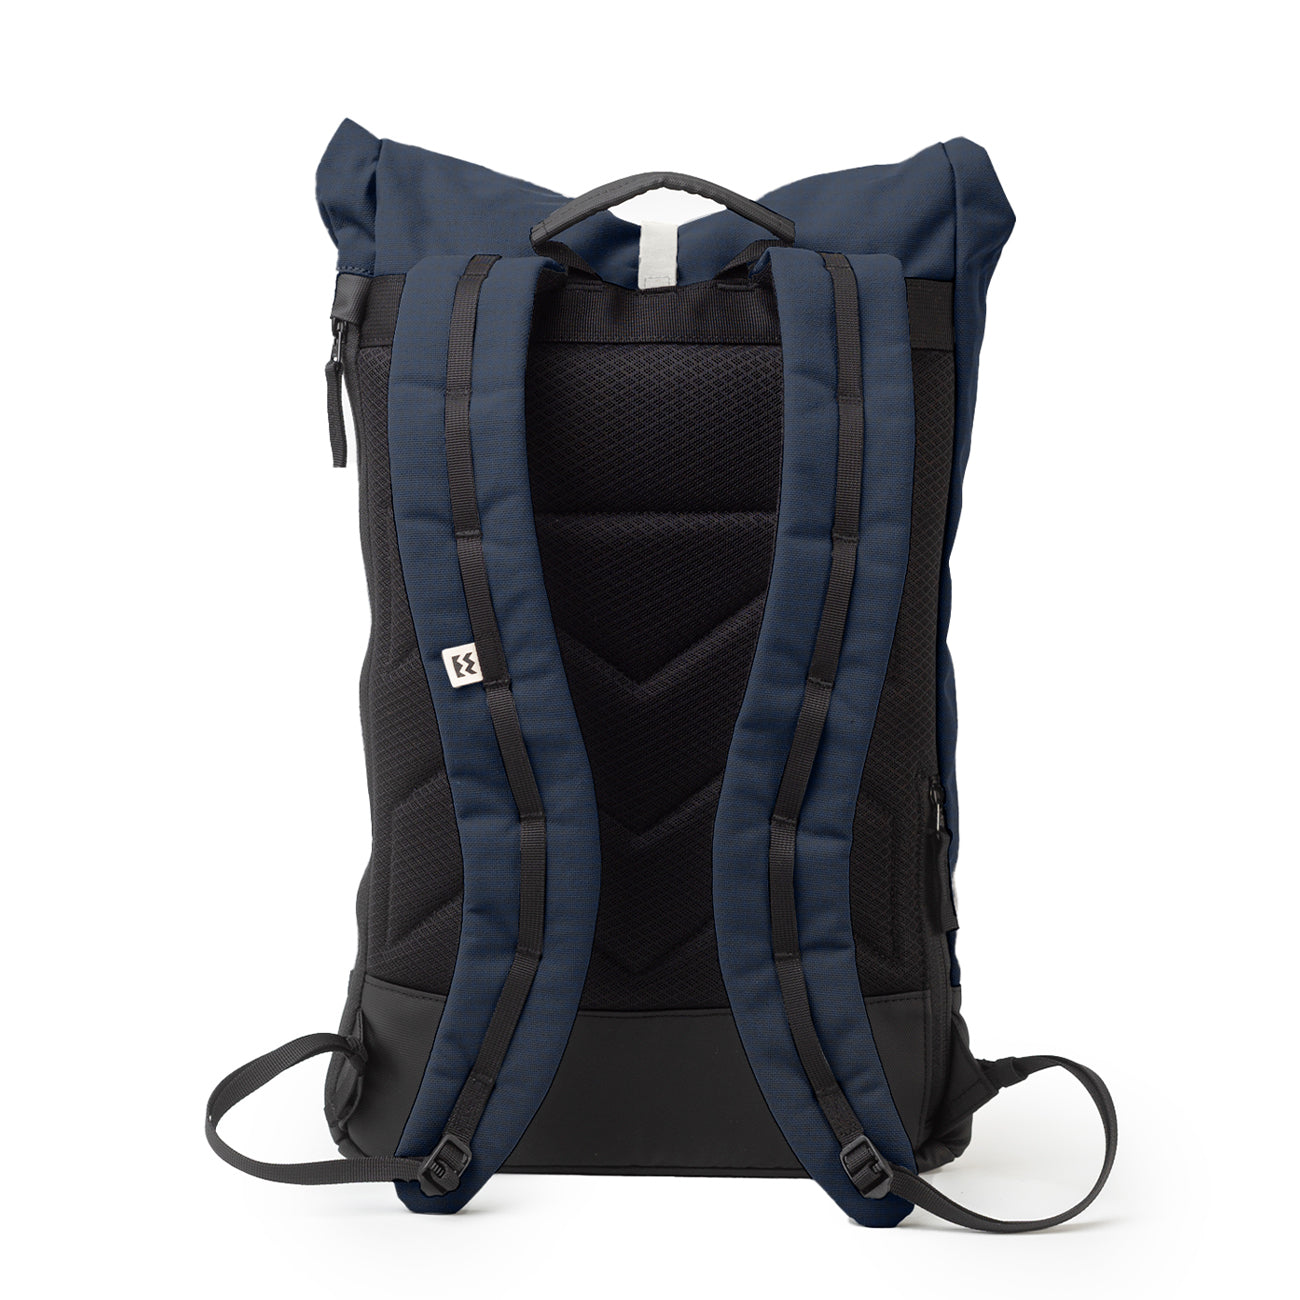 back view of the navy blue eco friendly backpack from mero mero